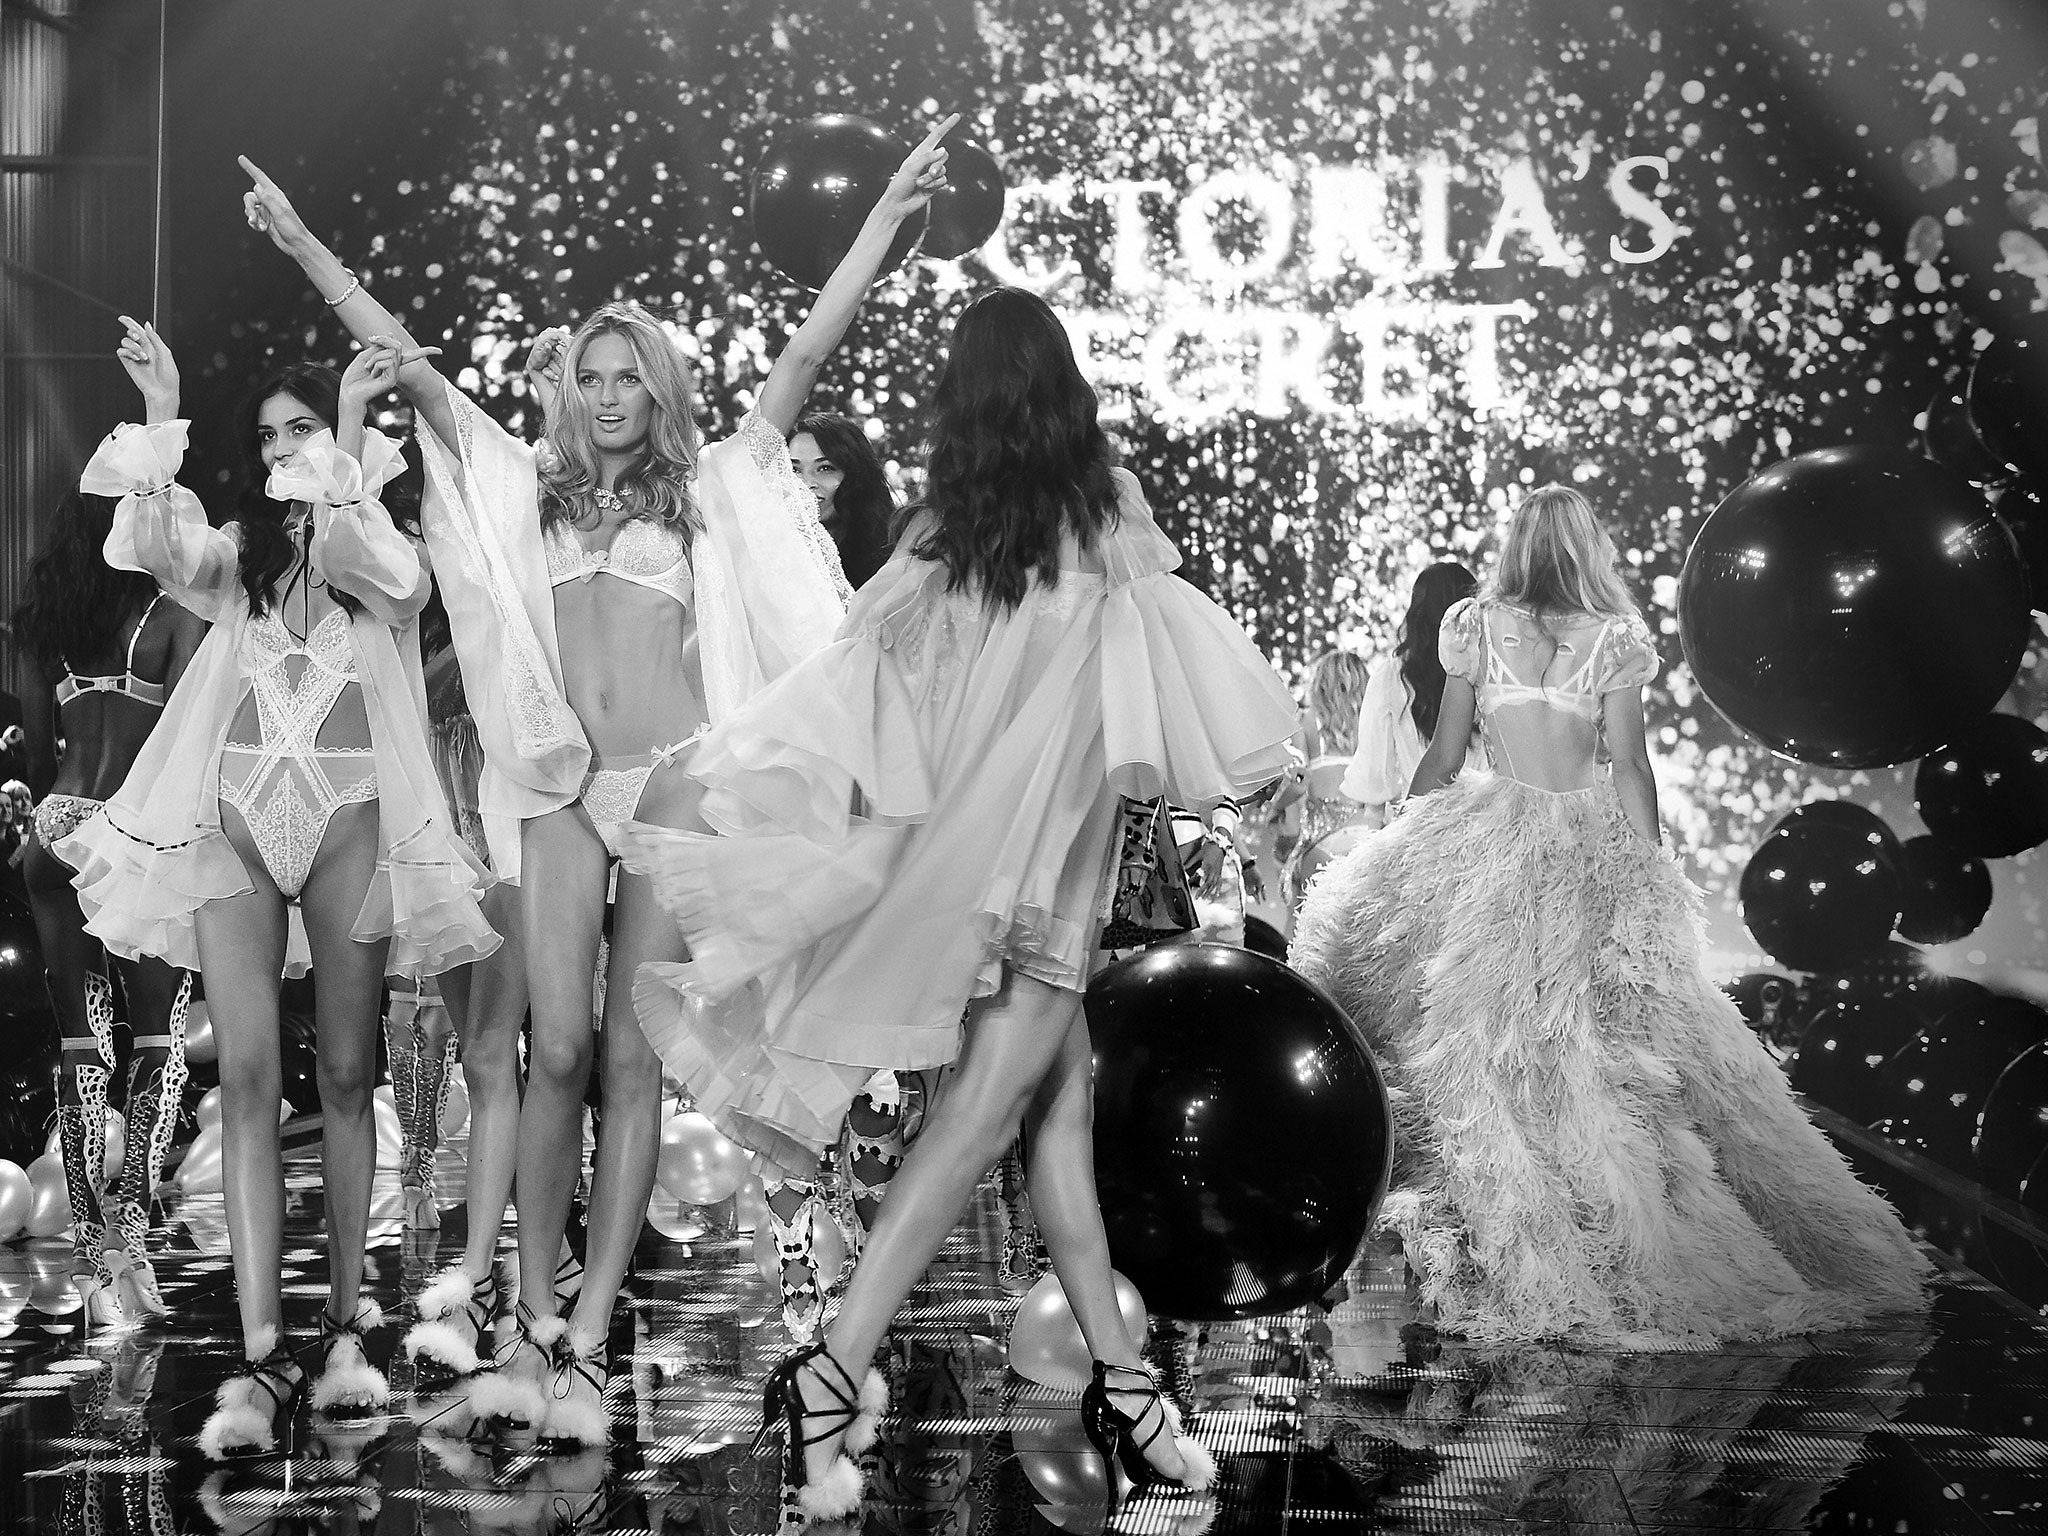 A general view during the 2014 Victoria's Secret Fashion Show at Earl's Court exhibition centre on 2 December, 2014 in London, England